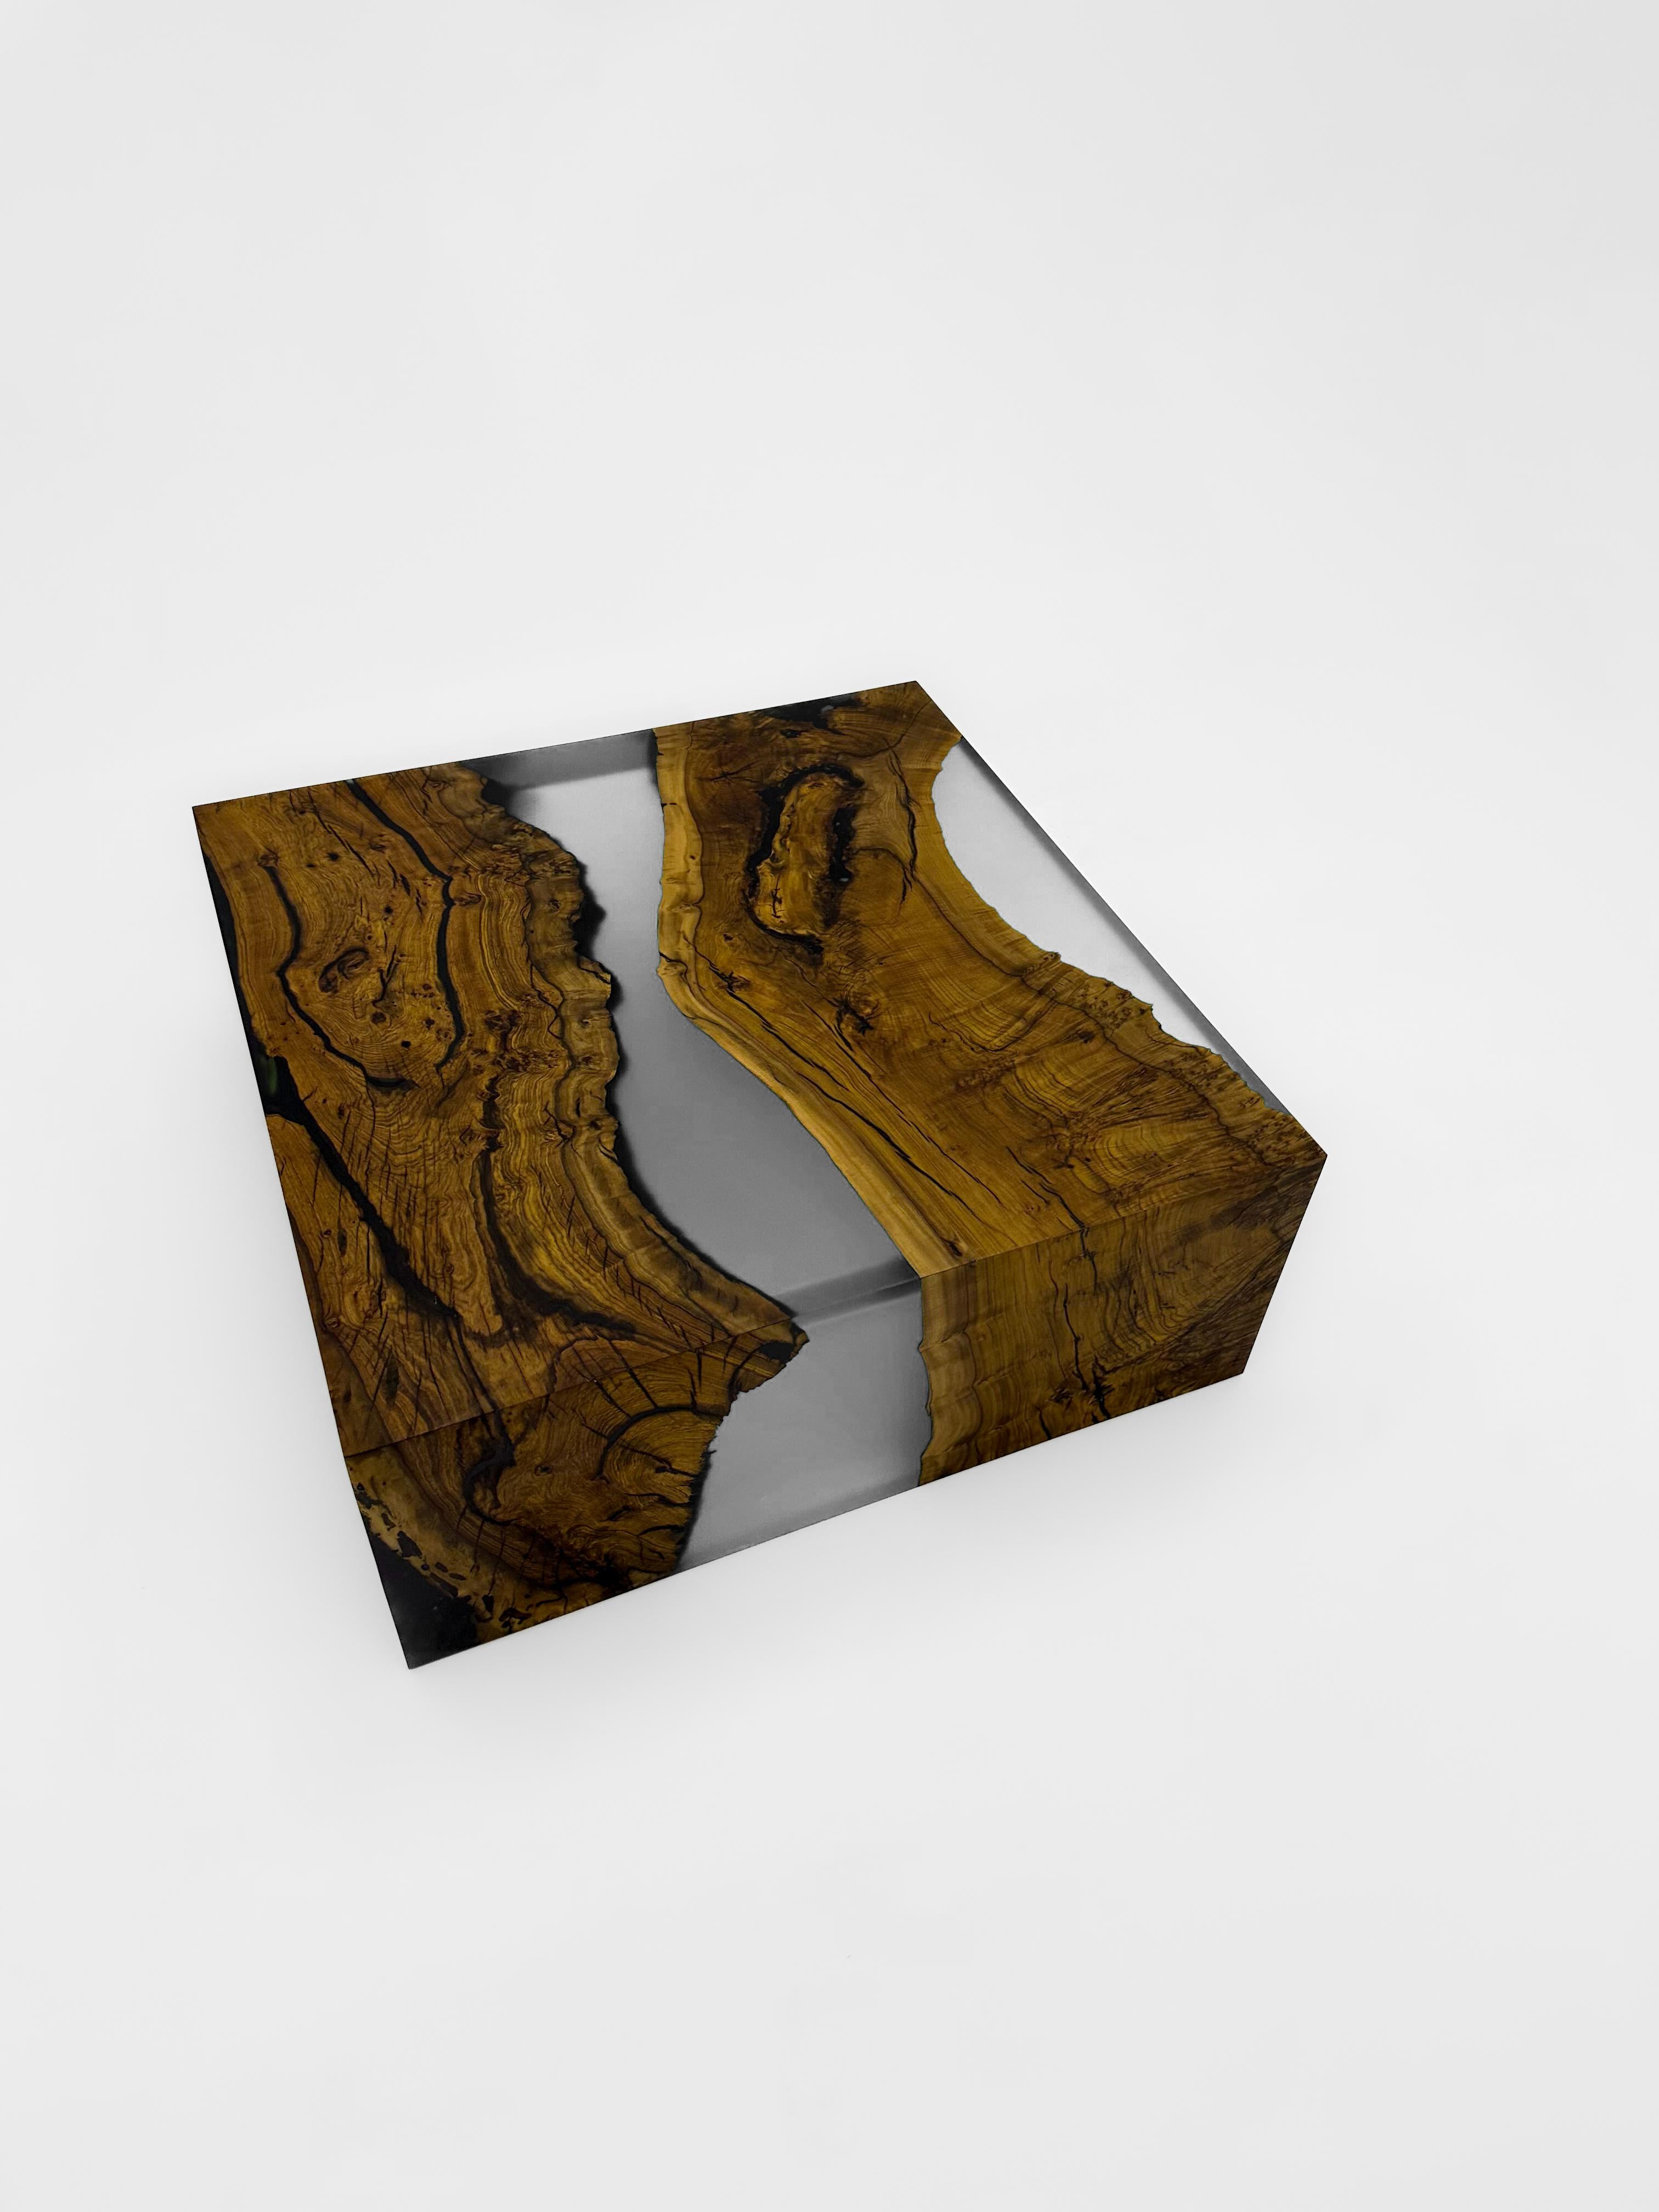 Waterfall Walnut Wood Ice Epoxy Coffee Table

Presenting our Epoxy Waterfall Table – a true sample of craftsmanship and elegance. This exceptional piece of furniture is designed to be more than just a coffee table; it's a statement of refined taste